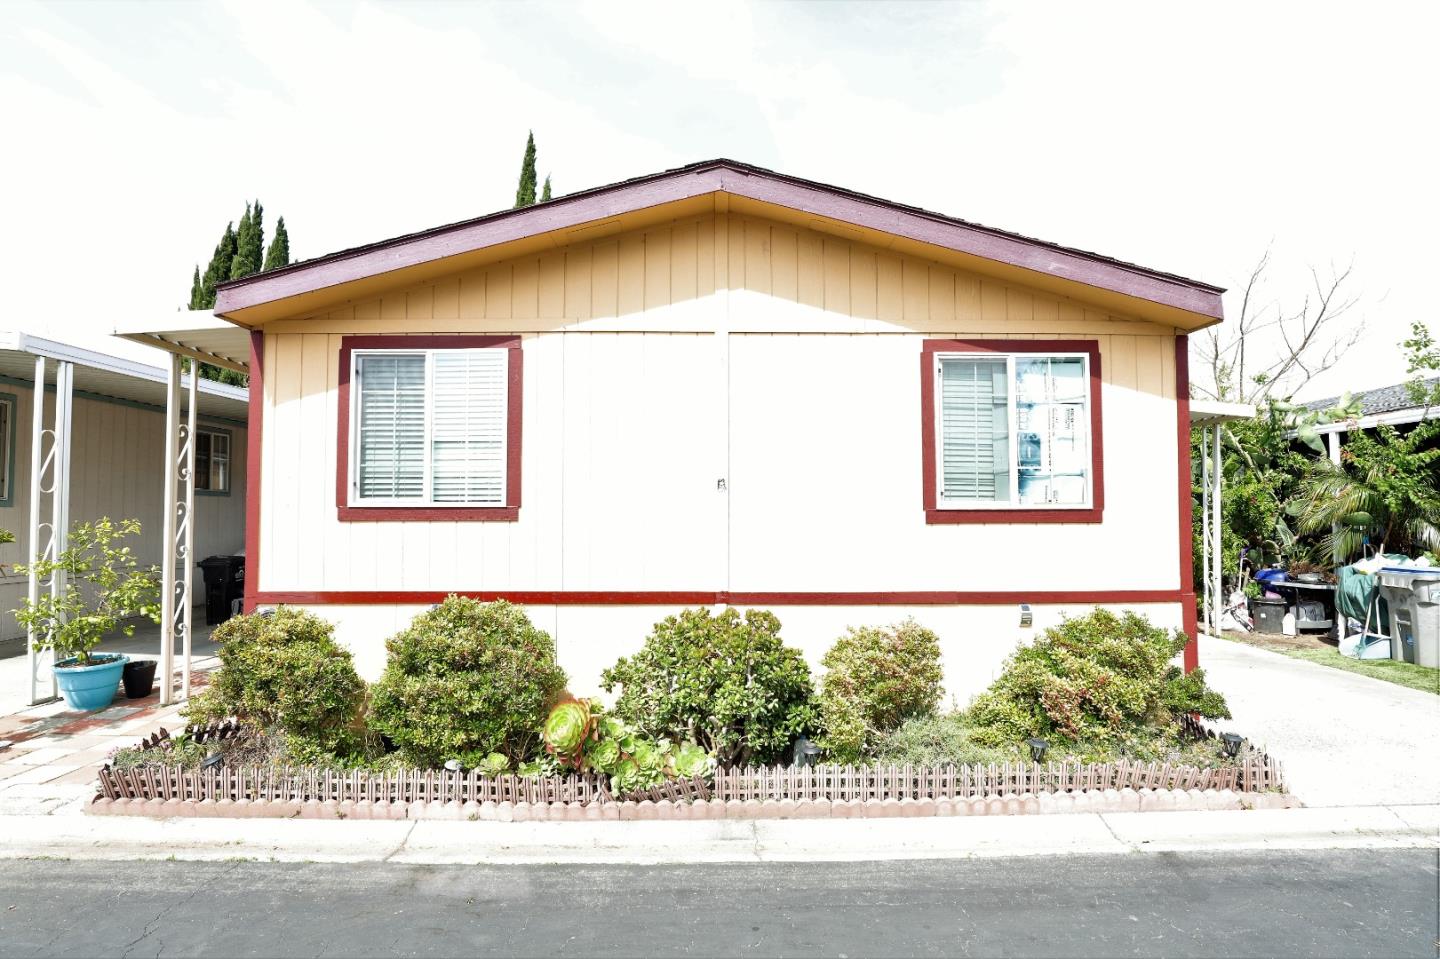 Photo of 2151 Oakland Rd #306 in San Jose, CA